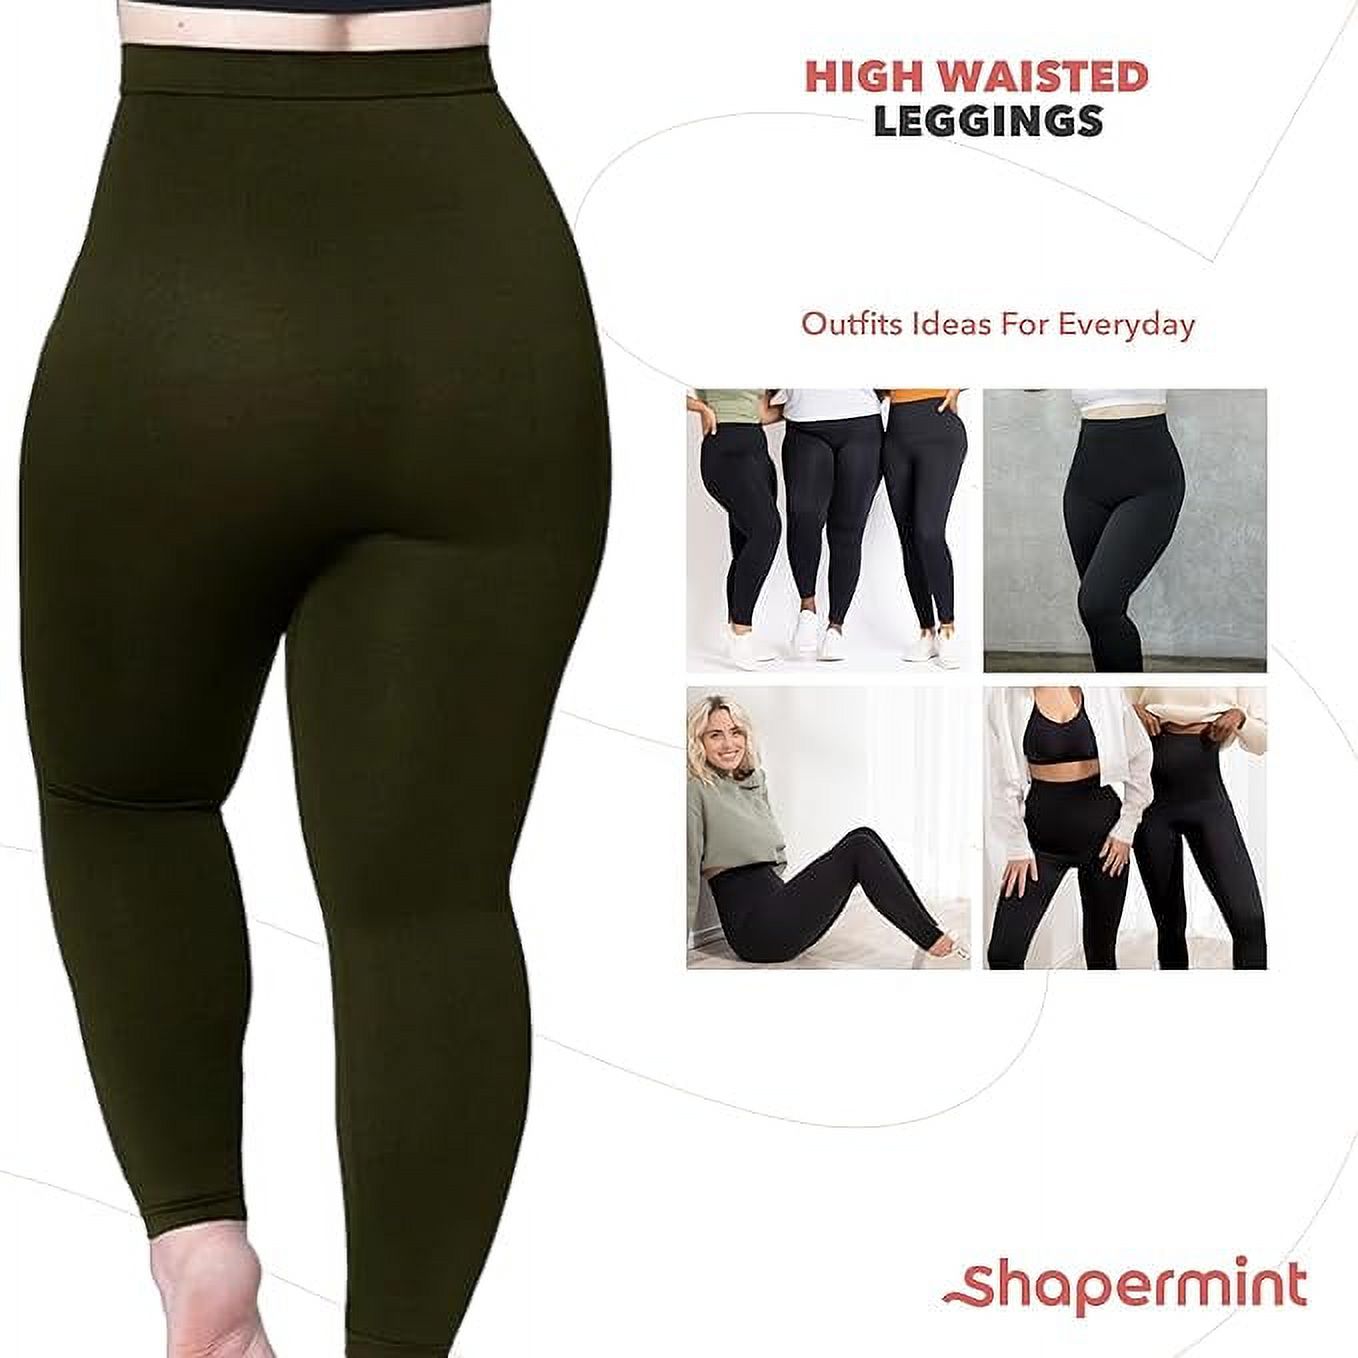 Shapermint Women’s High Waisted Shaping Leggings - image 4 of 6